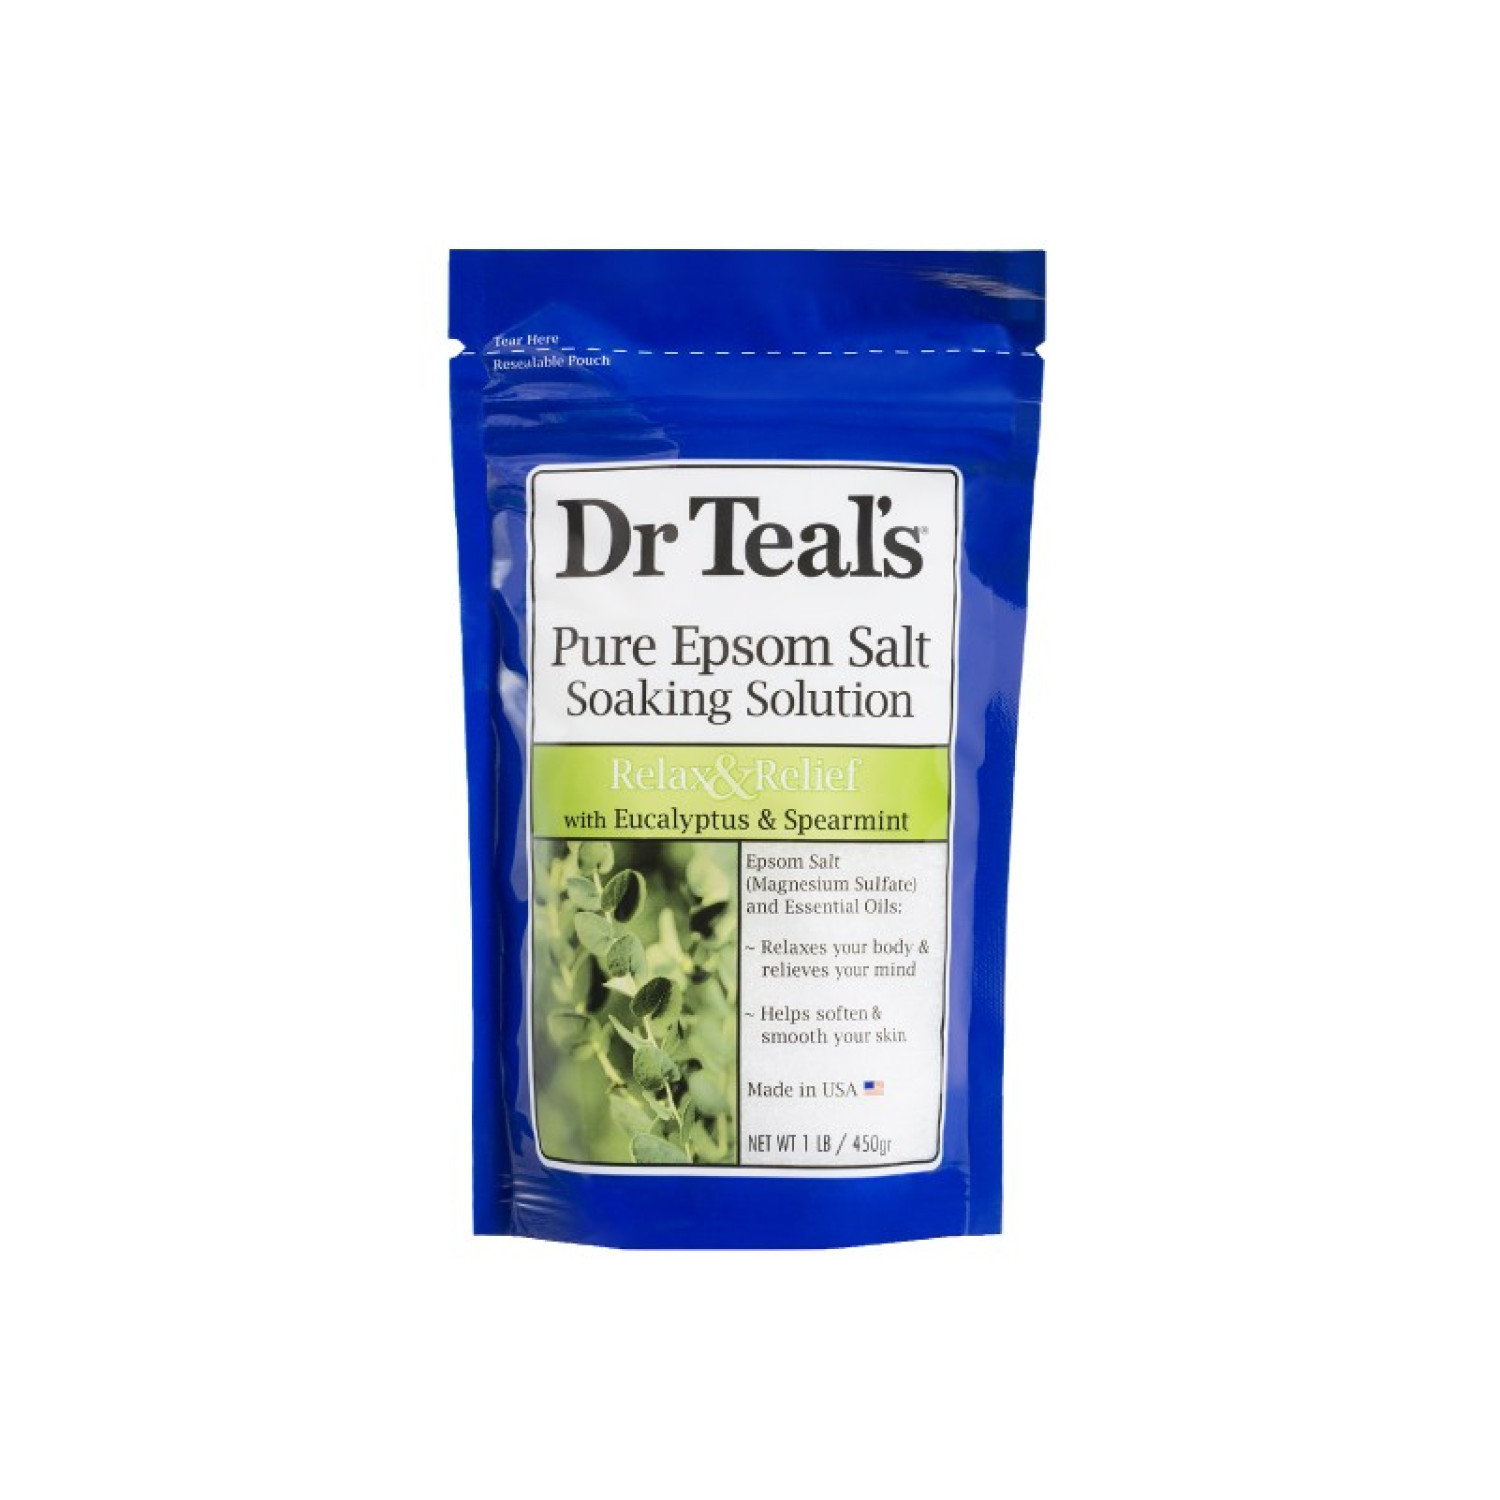 Dr Teal's Dr Teal’s Pure Epsom Salt Soaking Solution Relax & Purify with Eucalyptus & Spearmint